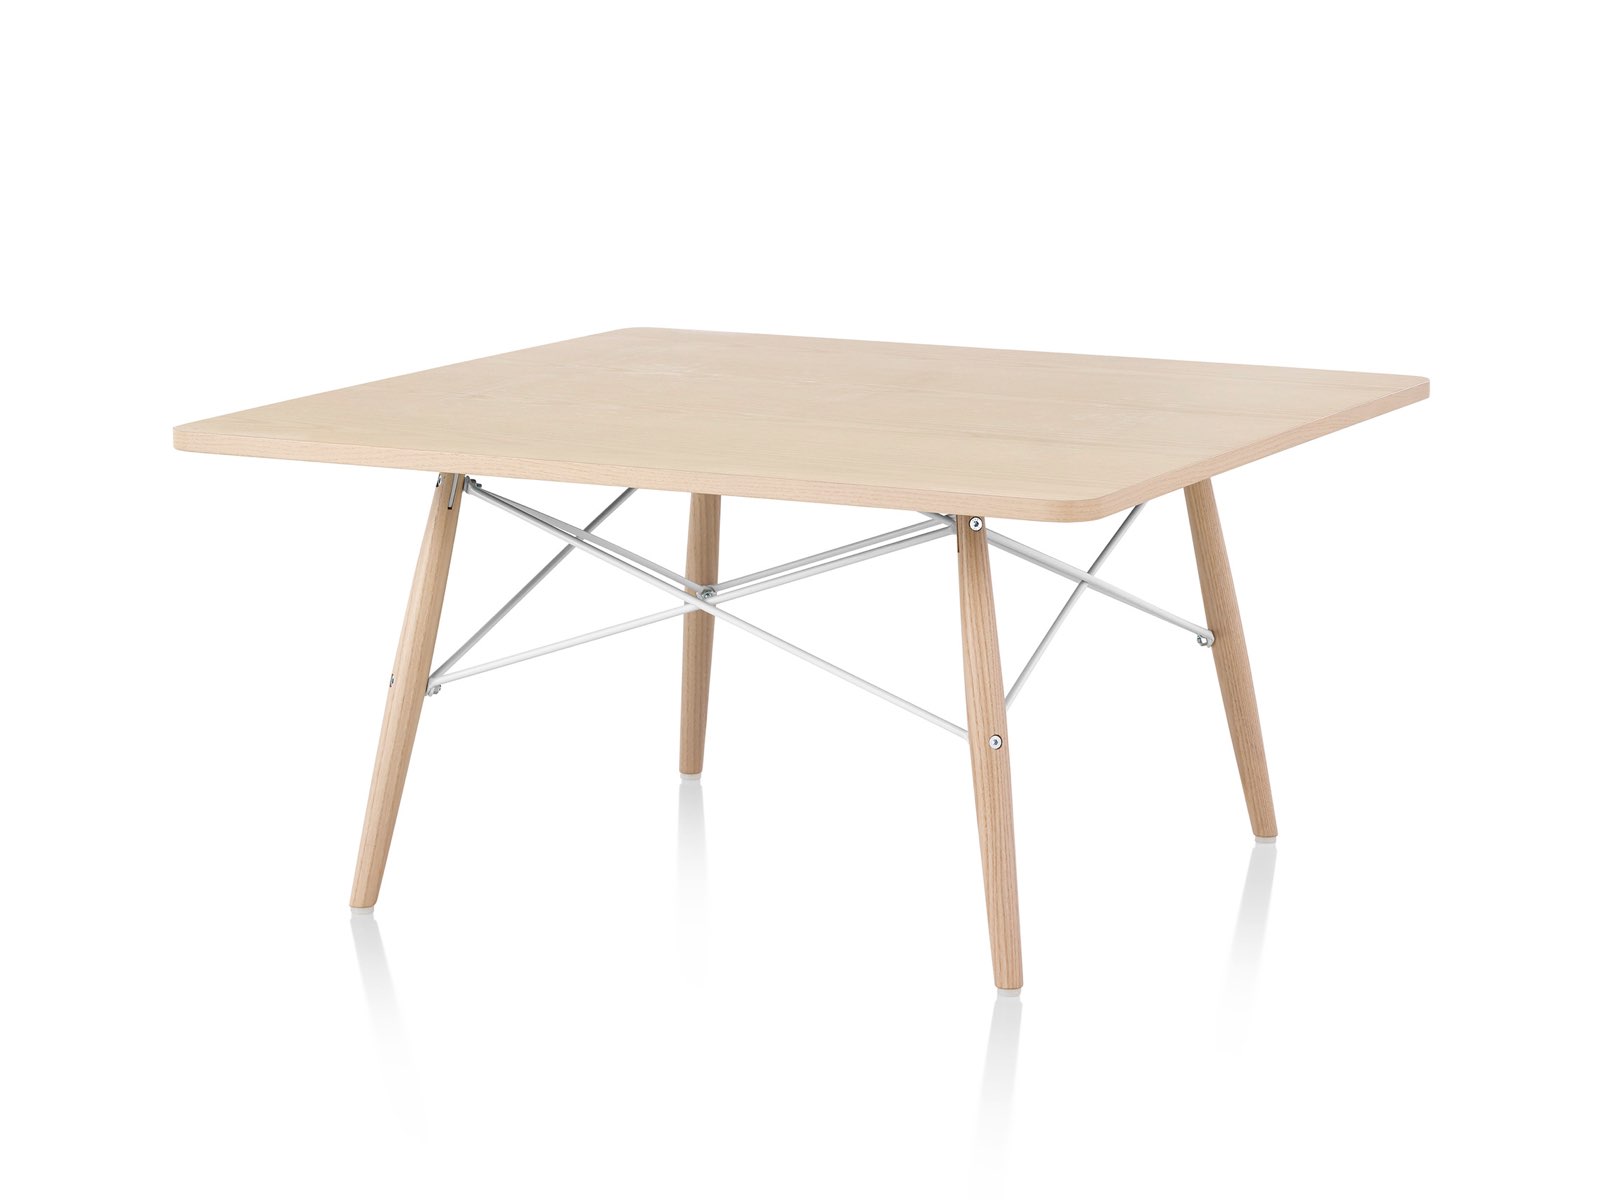 An angled view of an Eames Coffee Table with wood legs, metal cross-struts, and a light wood top. 